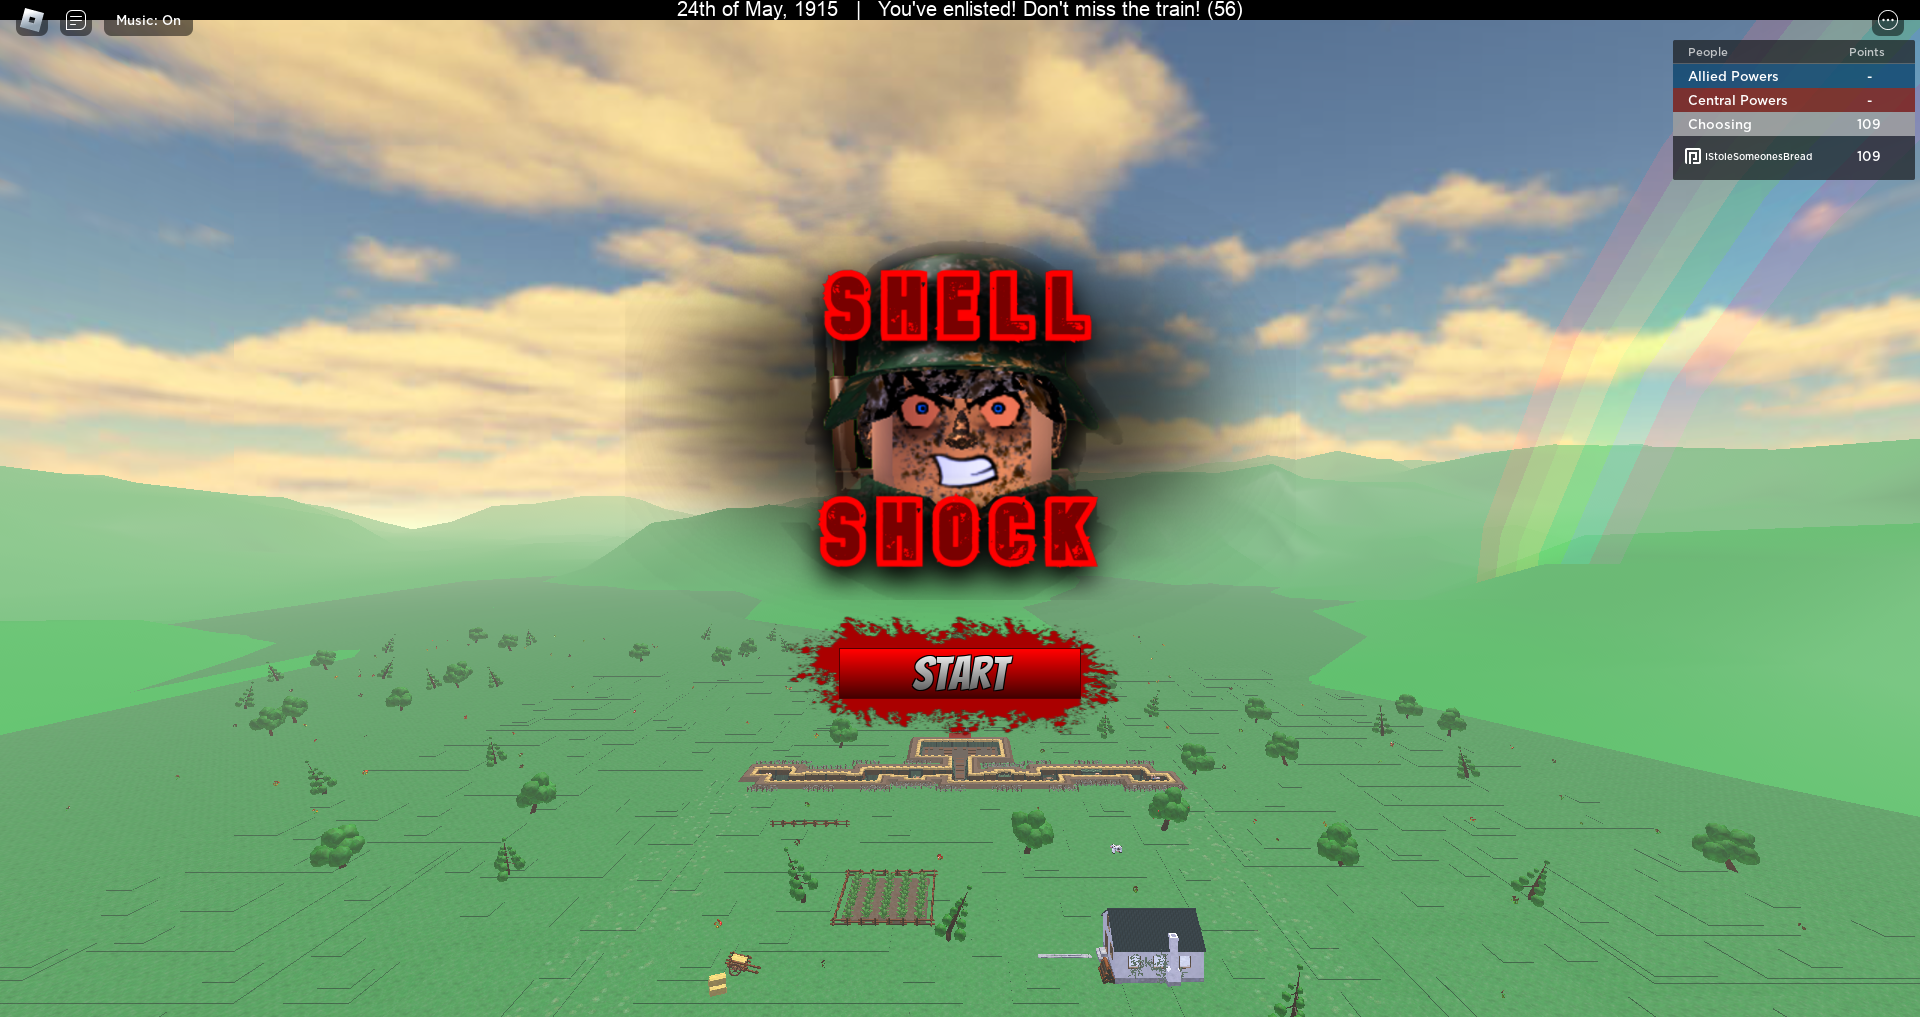 Roblox Shell Shock  The True World War One Experience 